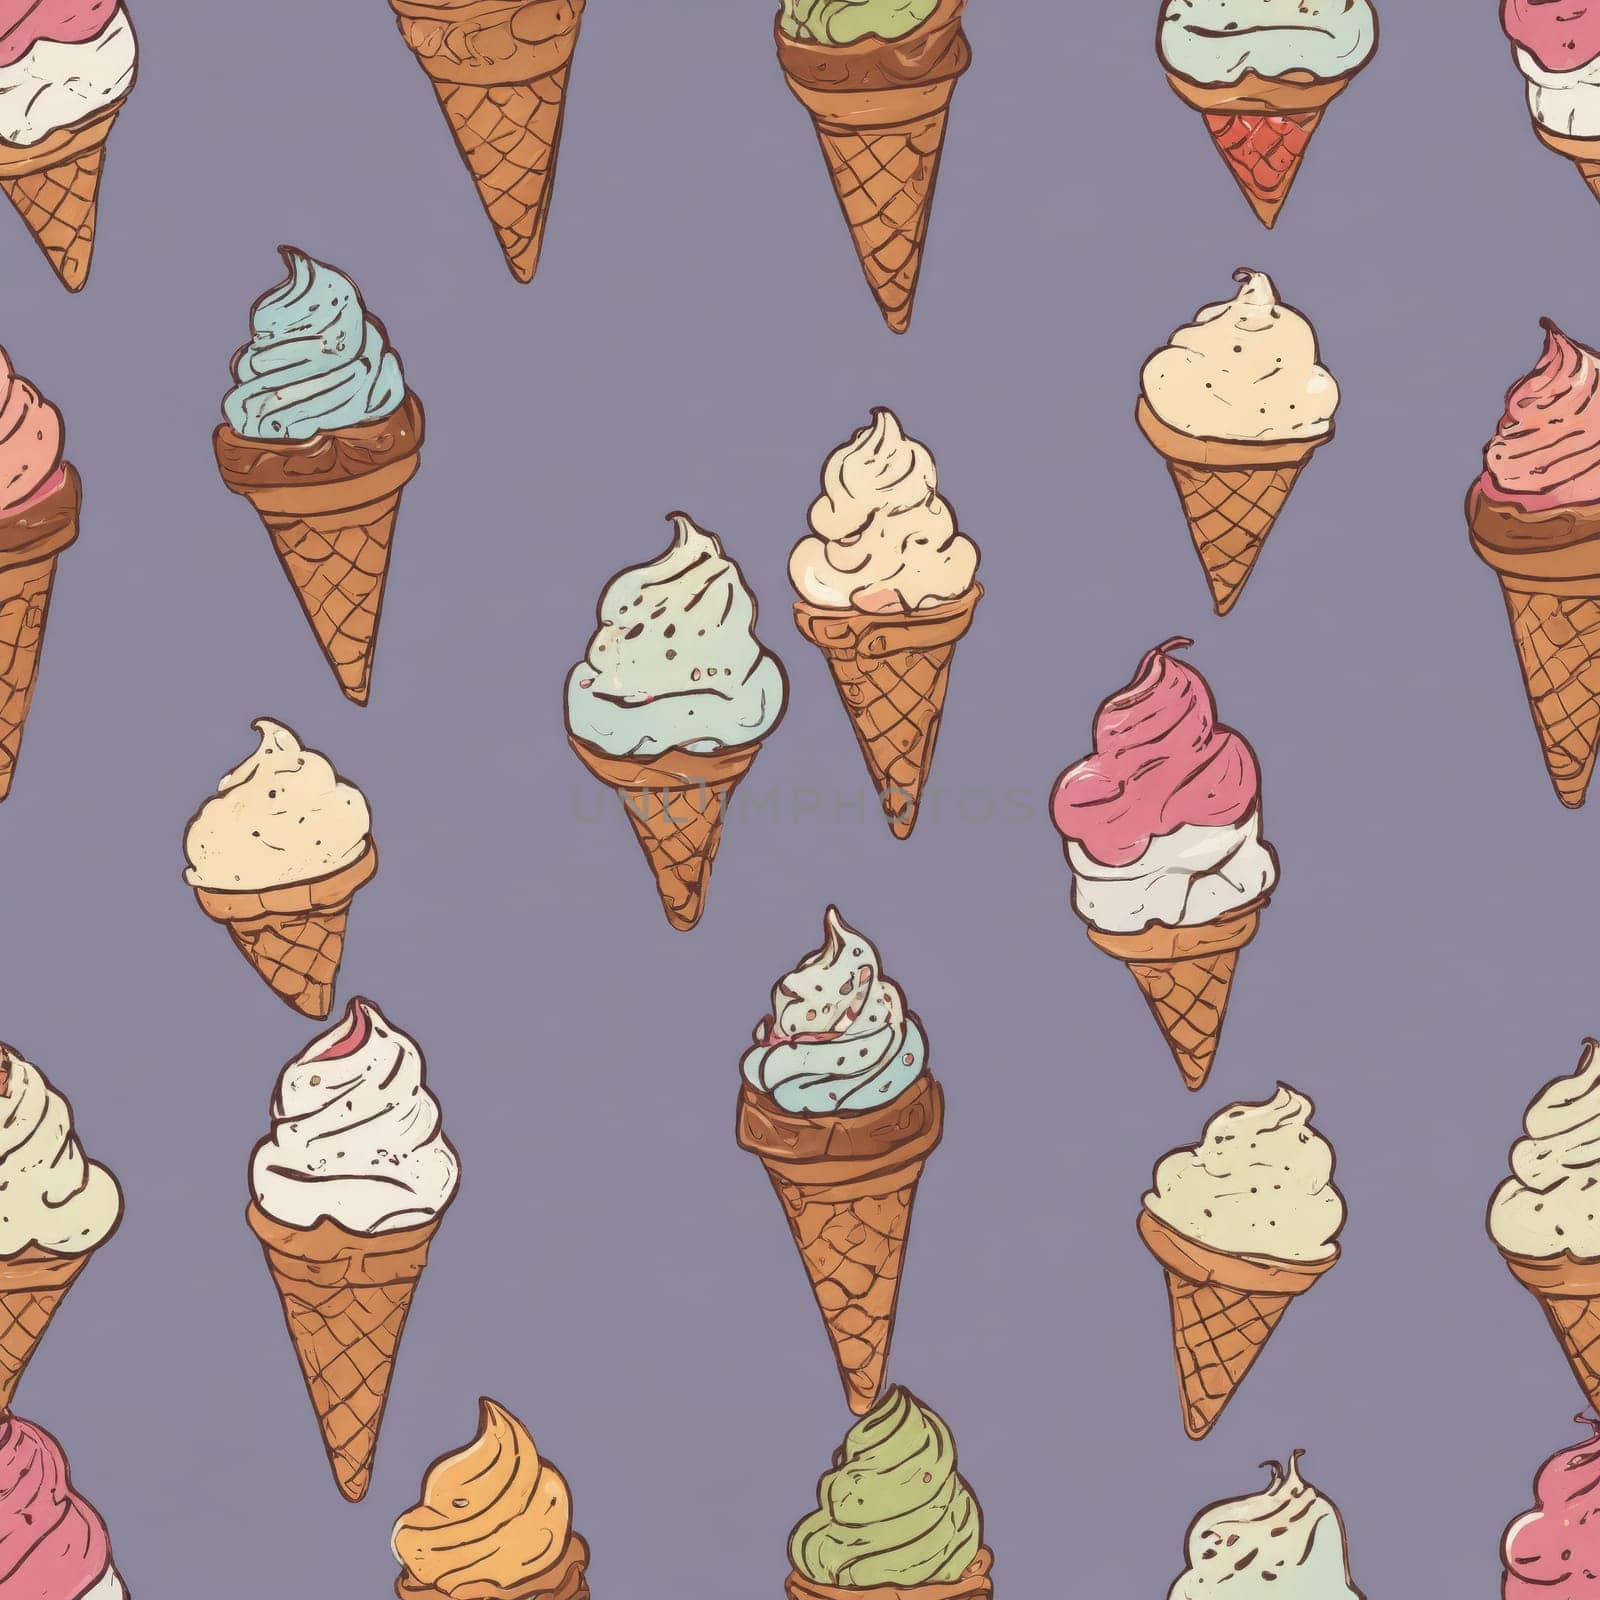 Whimsical Ice Cream Cones: A Playful Pastel Pattern by Andre1ns